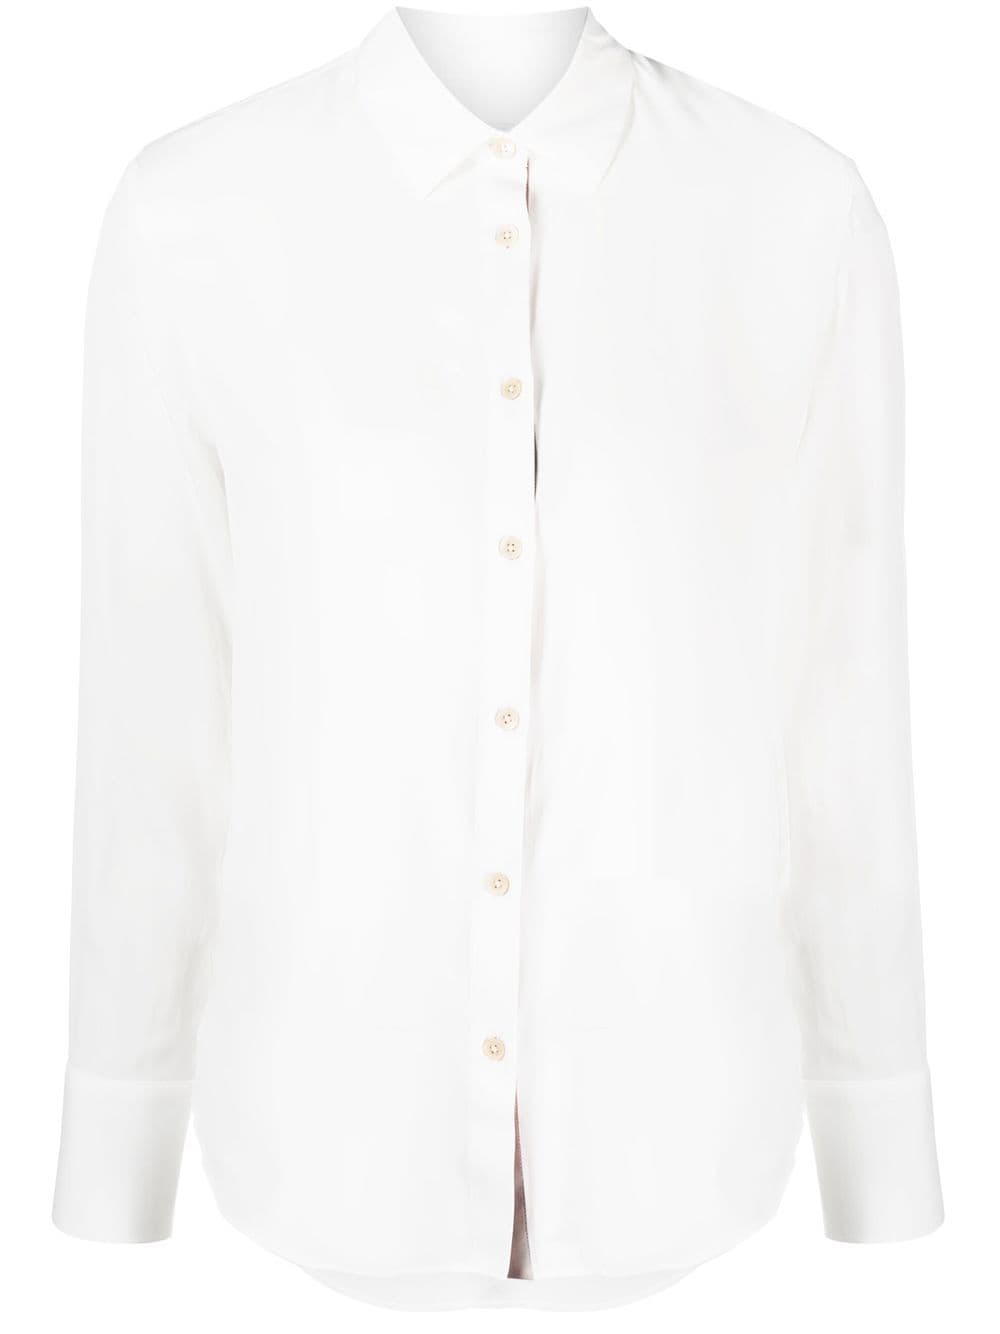 PS BY PAUL SMITH LONG SLEEVES SHIRT,W2R019BBK30847|093